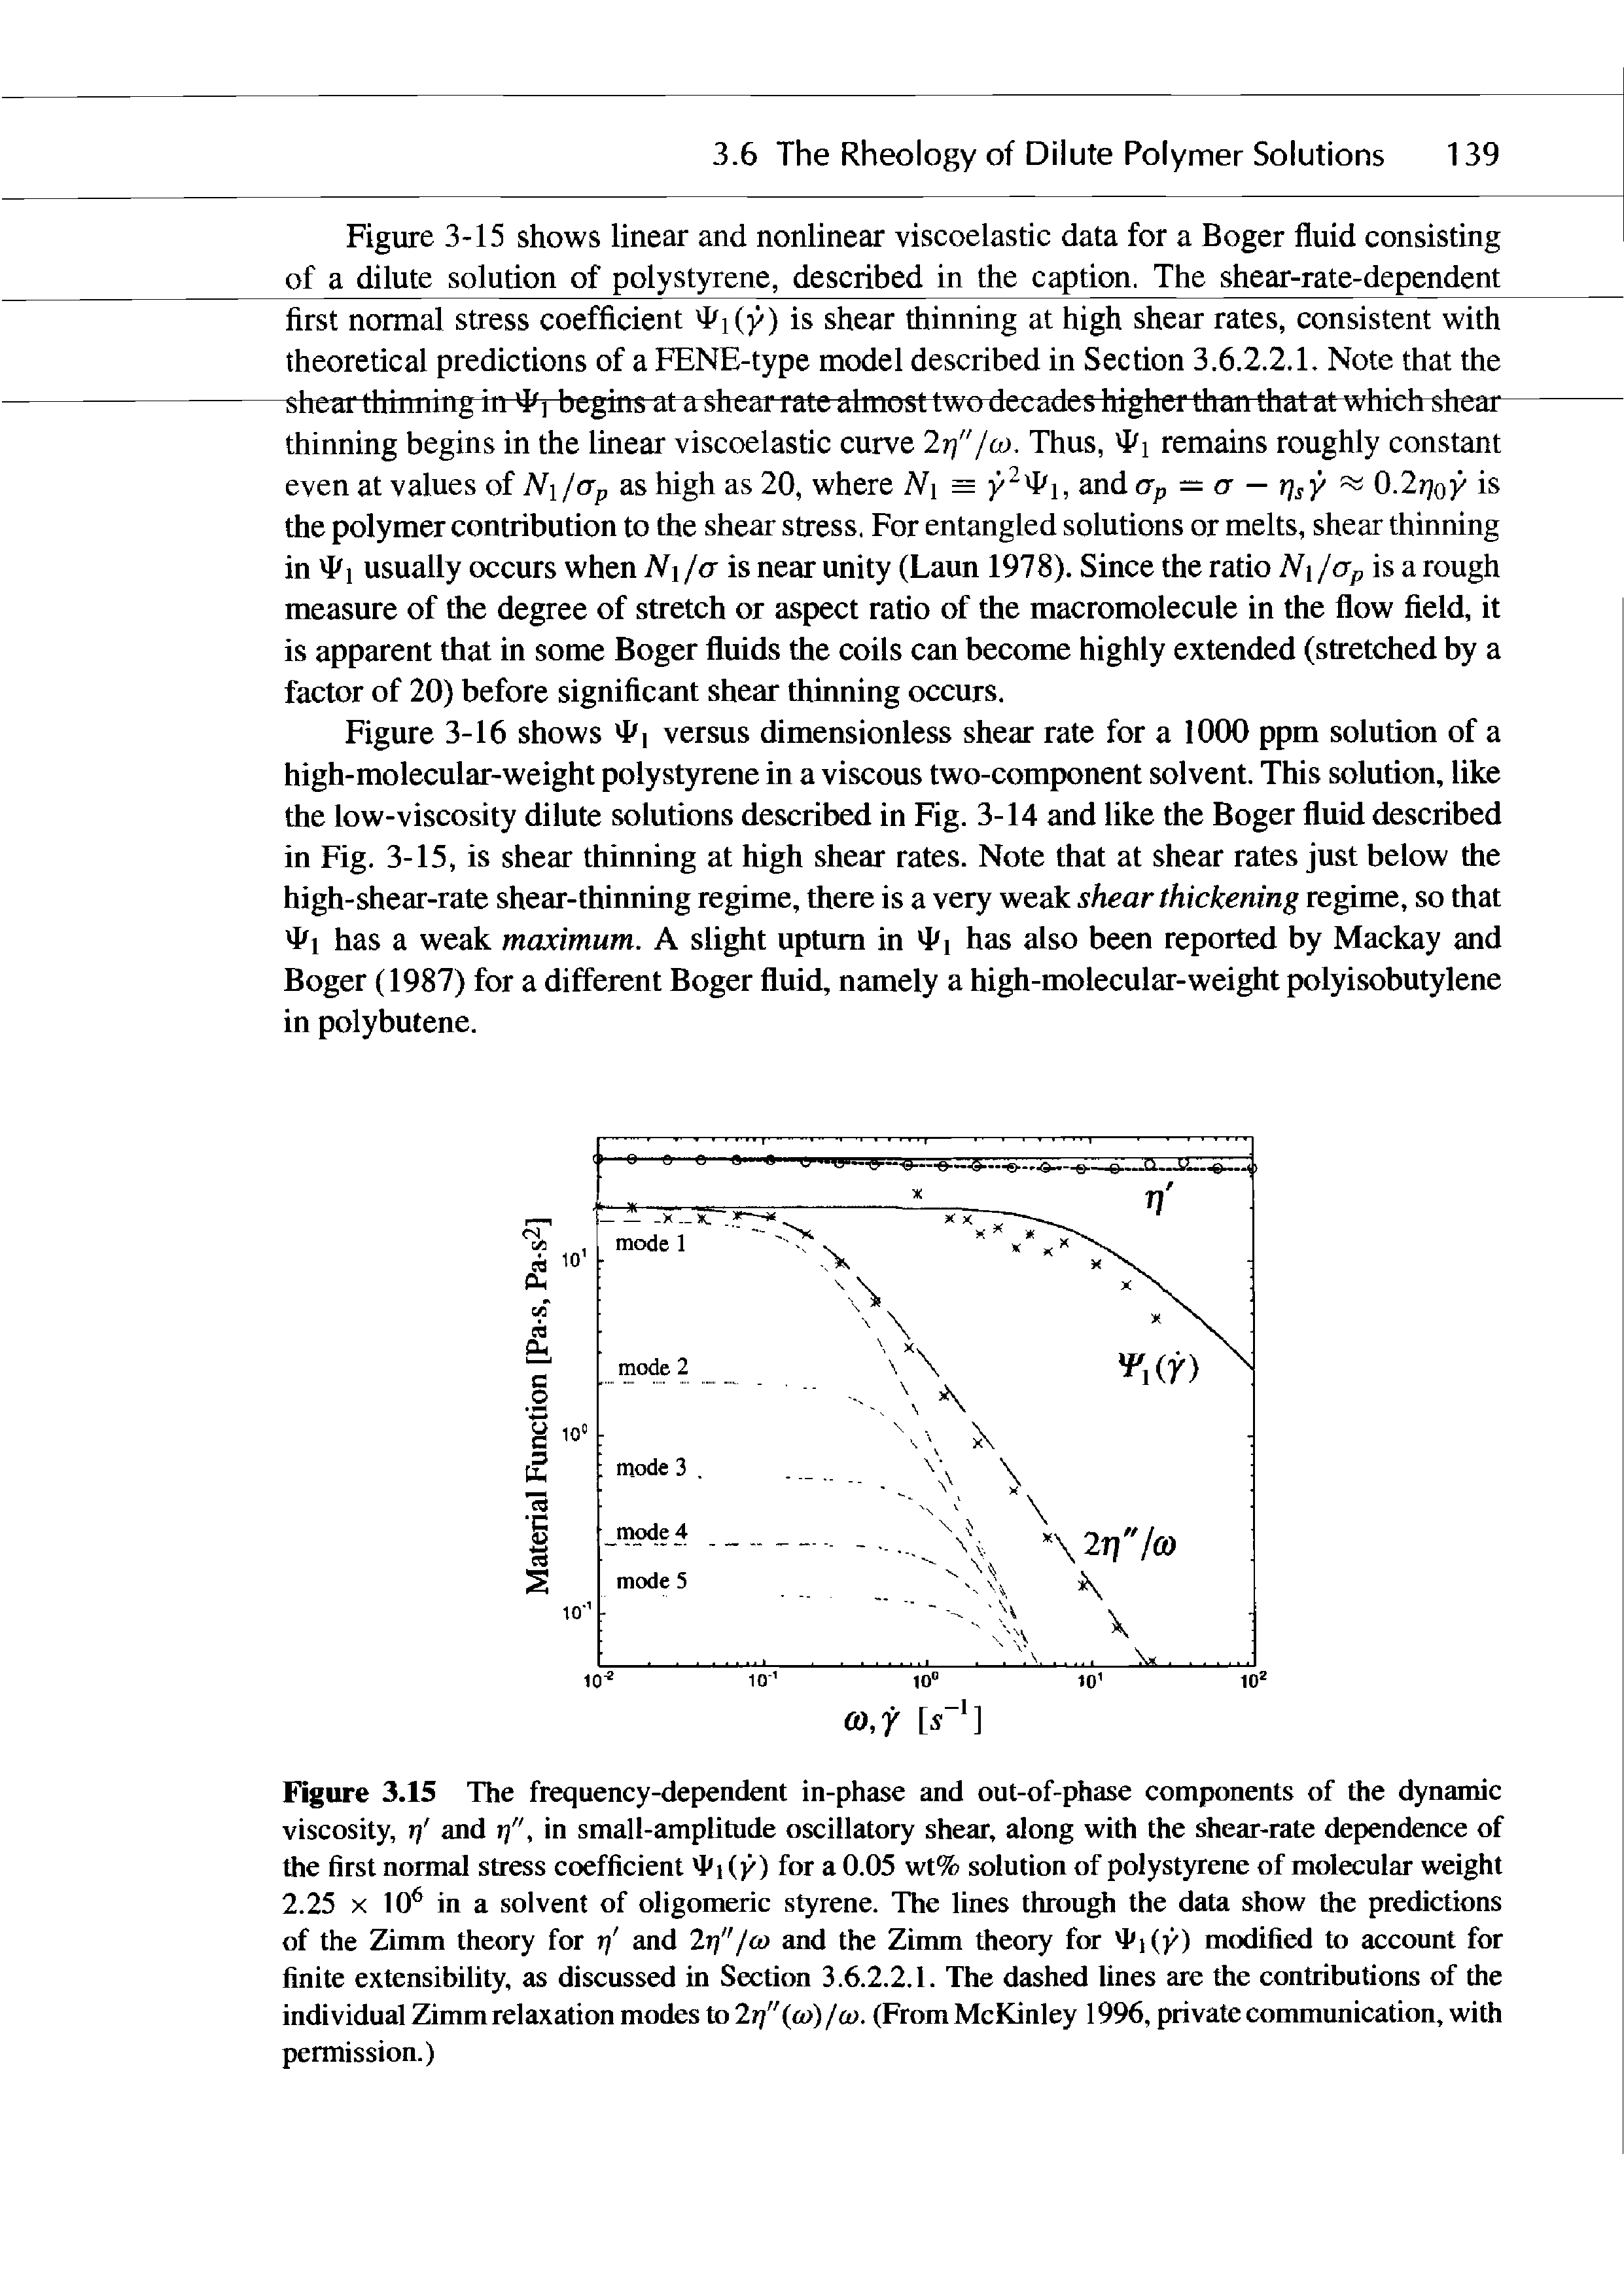 Figure 3.15 The frequency-dependent in-phase and out-of-phase components of the dynamic viscosity, rj and rj in small-amplitude oscillatory shear, along with the shear-rate dependence of the first normal stress coefficient hi (y) for a 0.05 wt% solution of polystyrene of molecular weight 2.25 X 10 in a solvent of oligomeric styrene. The lines through the data show the predictions of the Zimm theory for r and 2r)"f(o and the Zimm theory for hi(y) modified to account for finite extensibility, as discussed in Section 3.6.2.2.I. The dashed lines are the contributions of the individual Zimm relaxation modes to 2rj"((o) /<y. (From McKinley 1996, private communication, with permission.)...